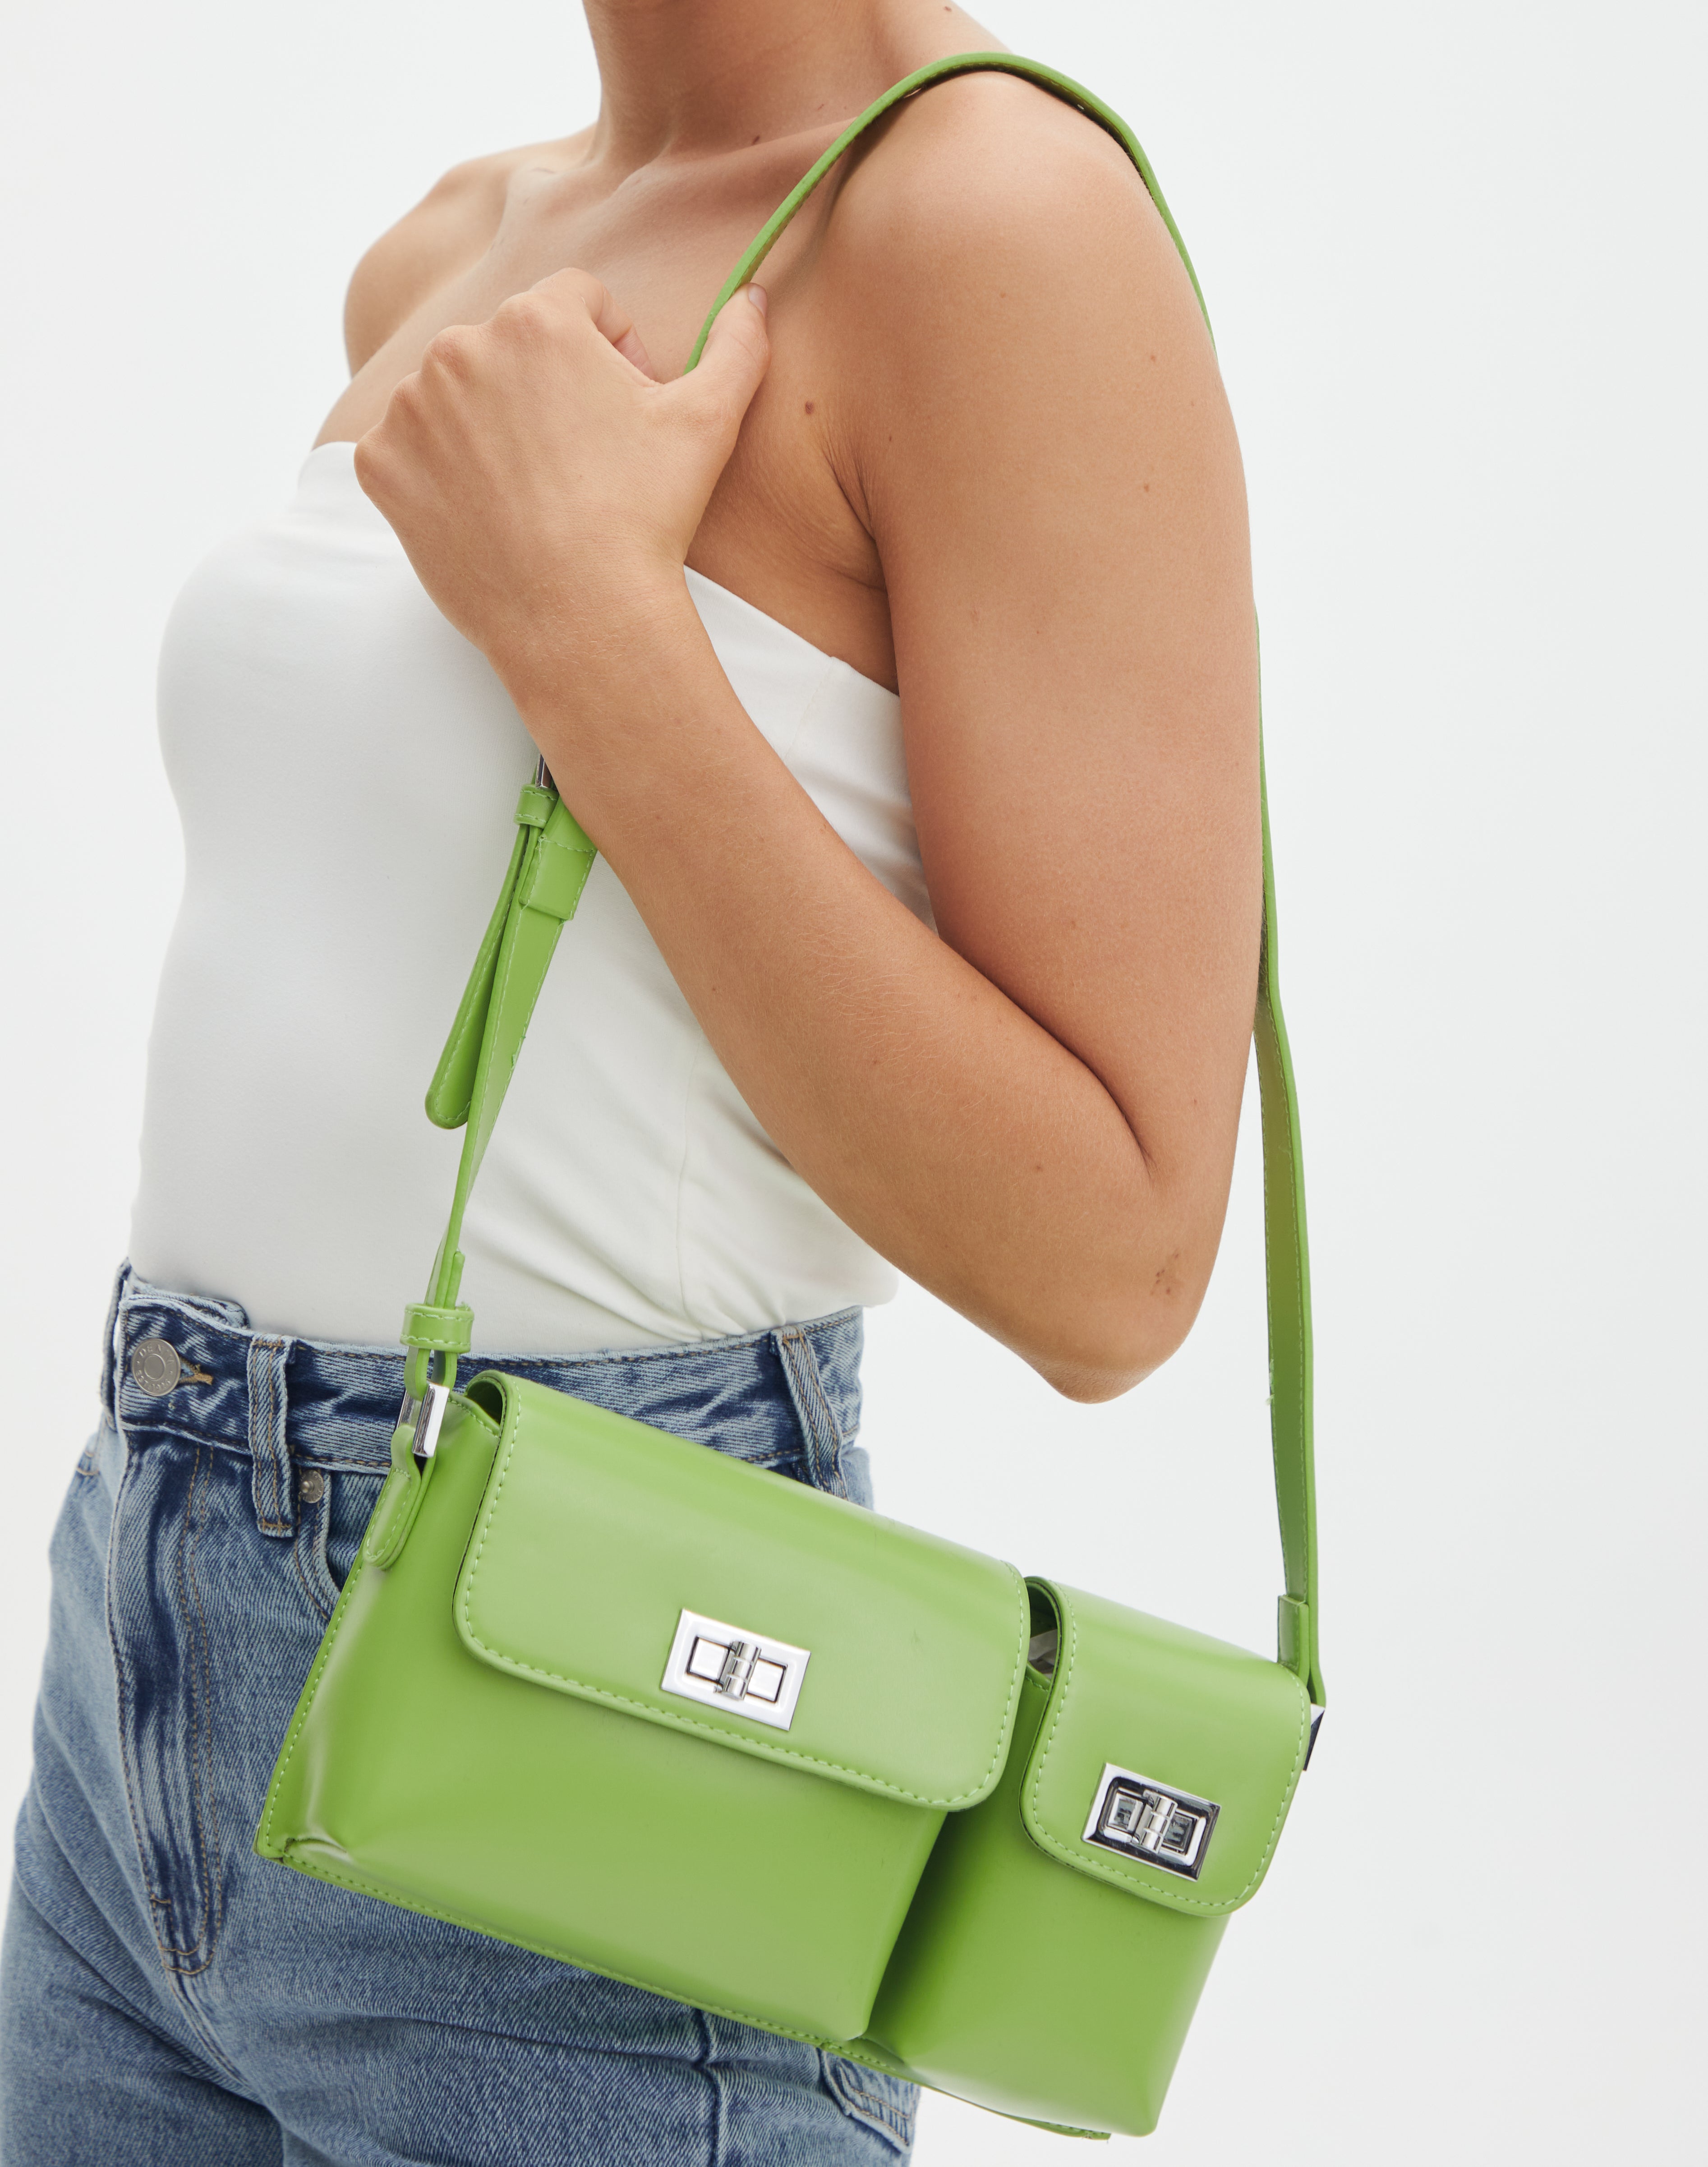 The Buckle-Strap Rectangular Bag in Patent Leather